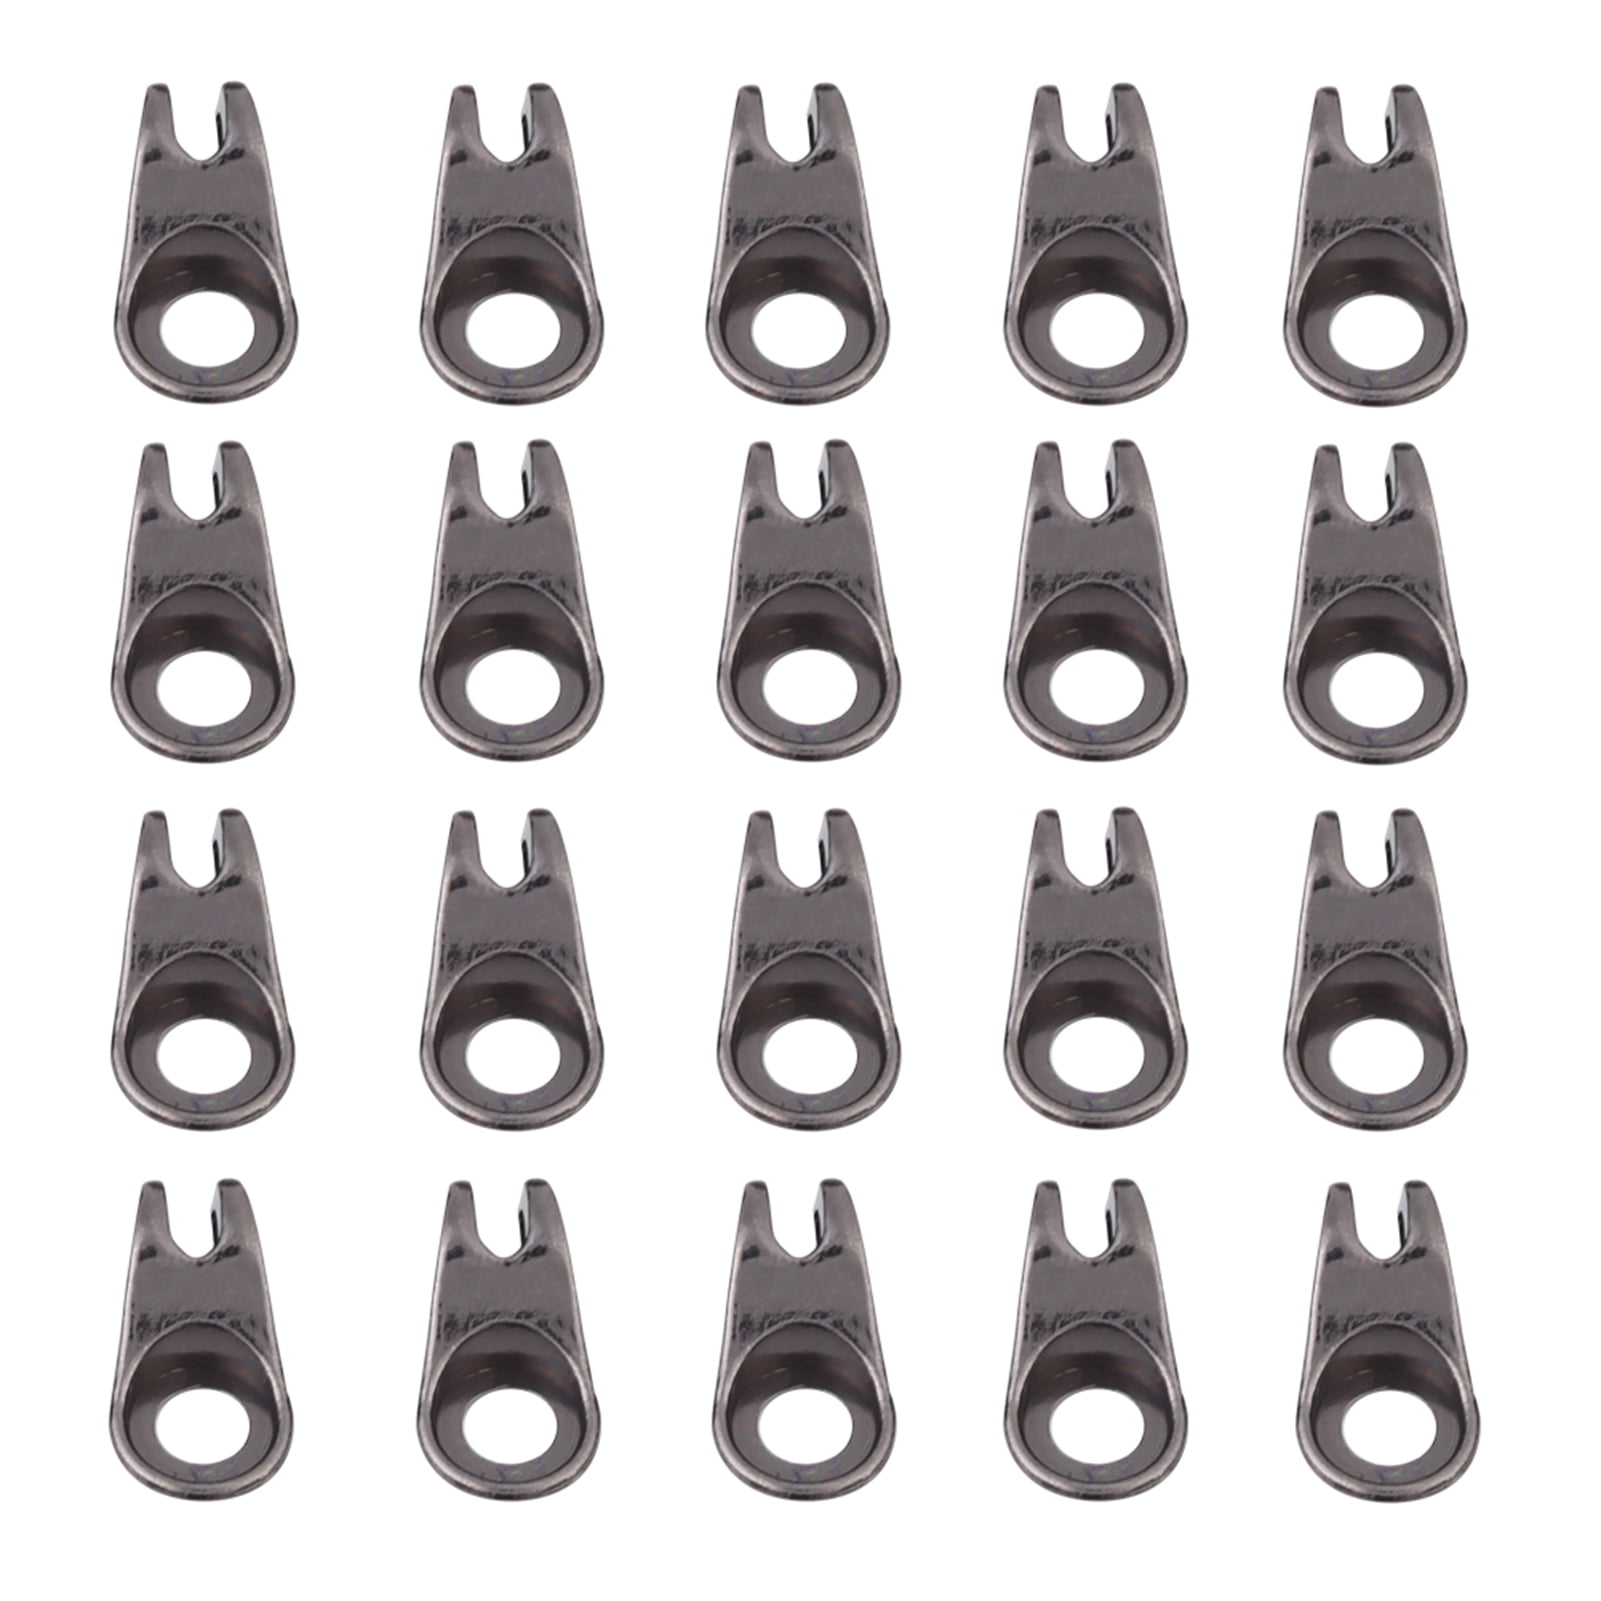  20pcs/set Boot Hooks, Shoe Lace Fittings With Rivets, Metal  Connector for Sneaker Shoelaces Repair Hiking Boots Board Shoes Casual  Shoes, Boot Eyelet Repair Kit : Arts, Crafts & Sewing